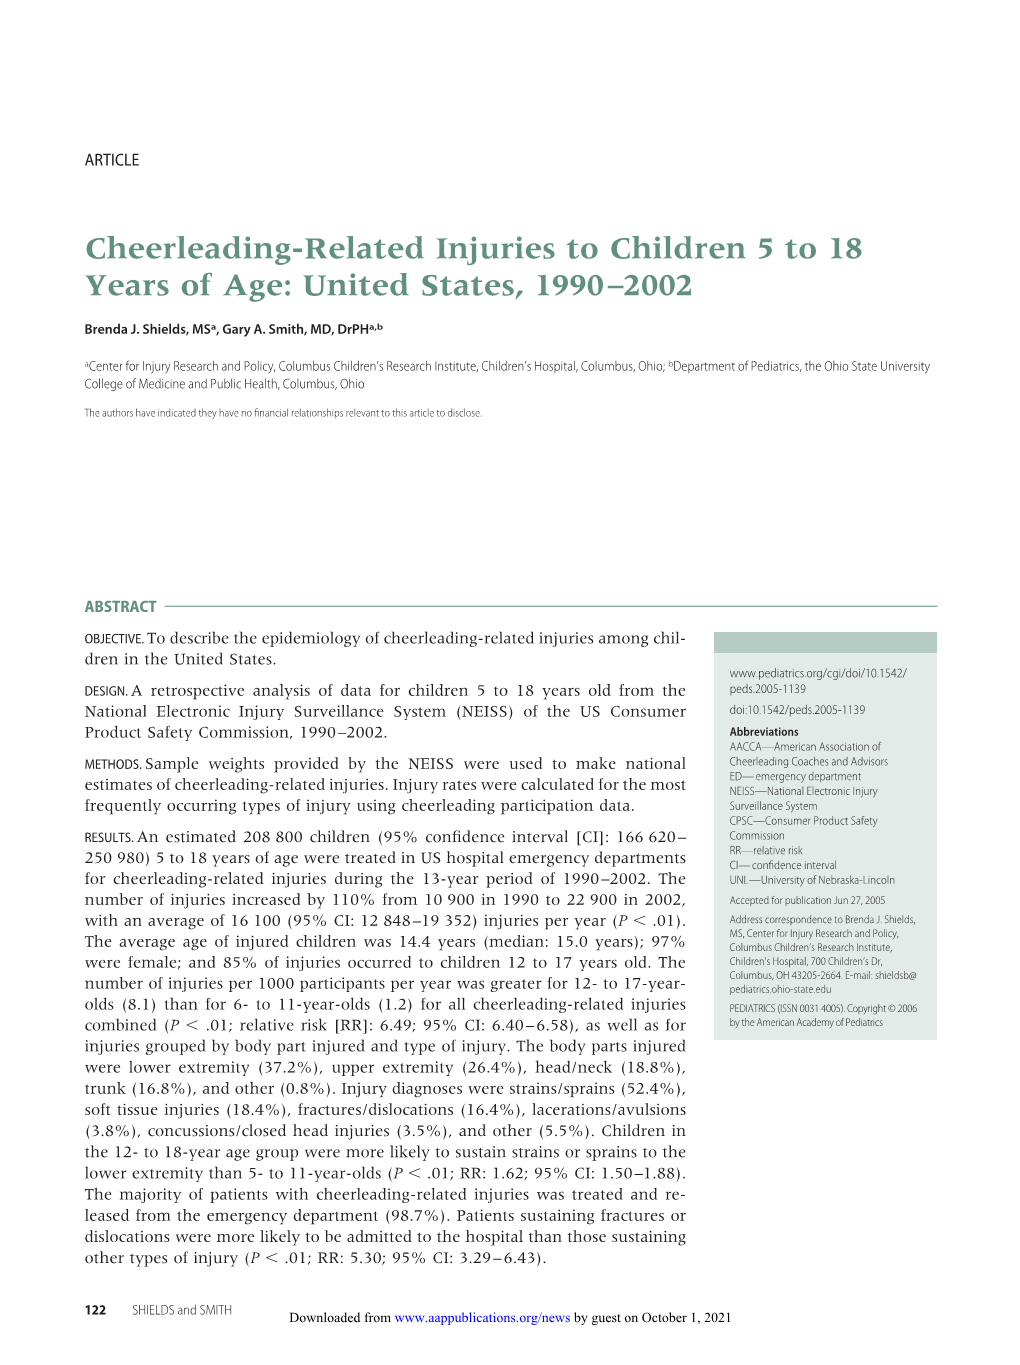 Cheerleading-Related Injuries to Children 5 to 18 Years of Age: United States, 1990–2002